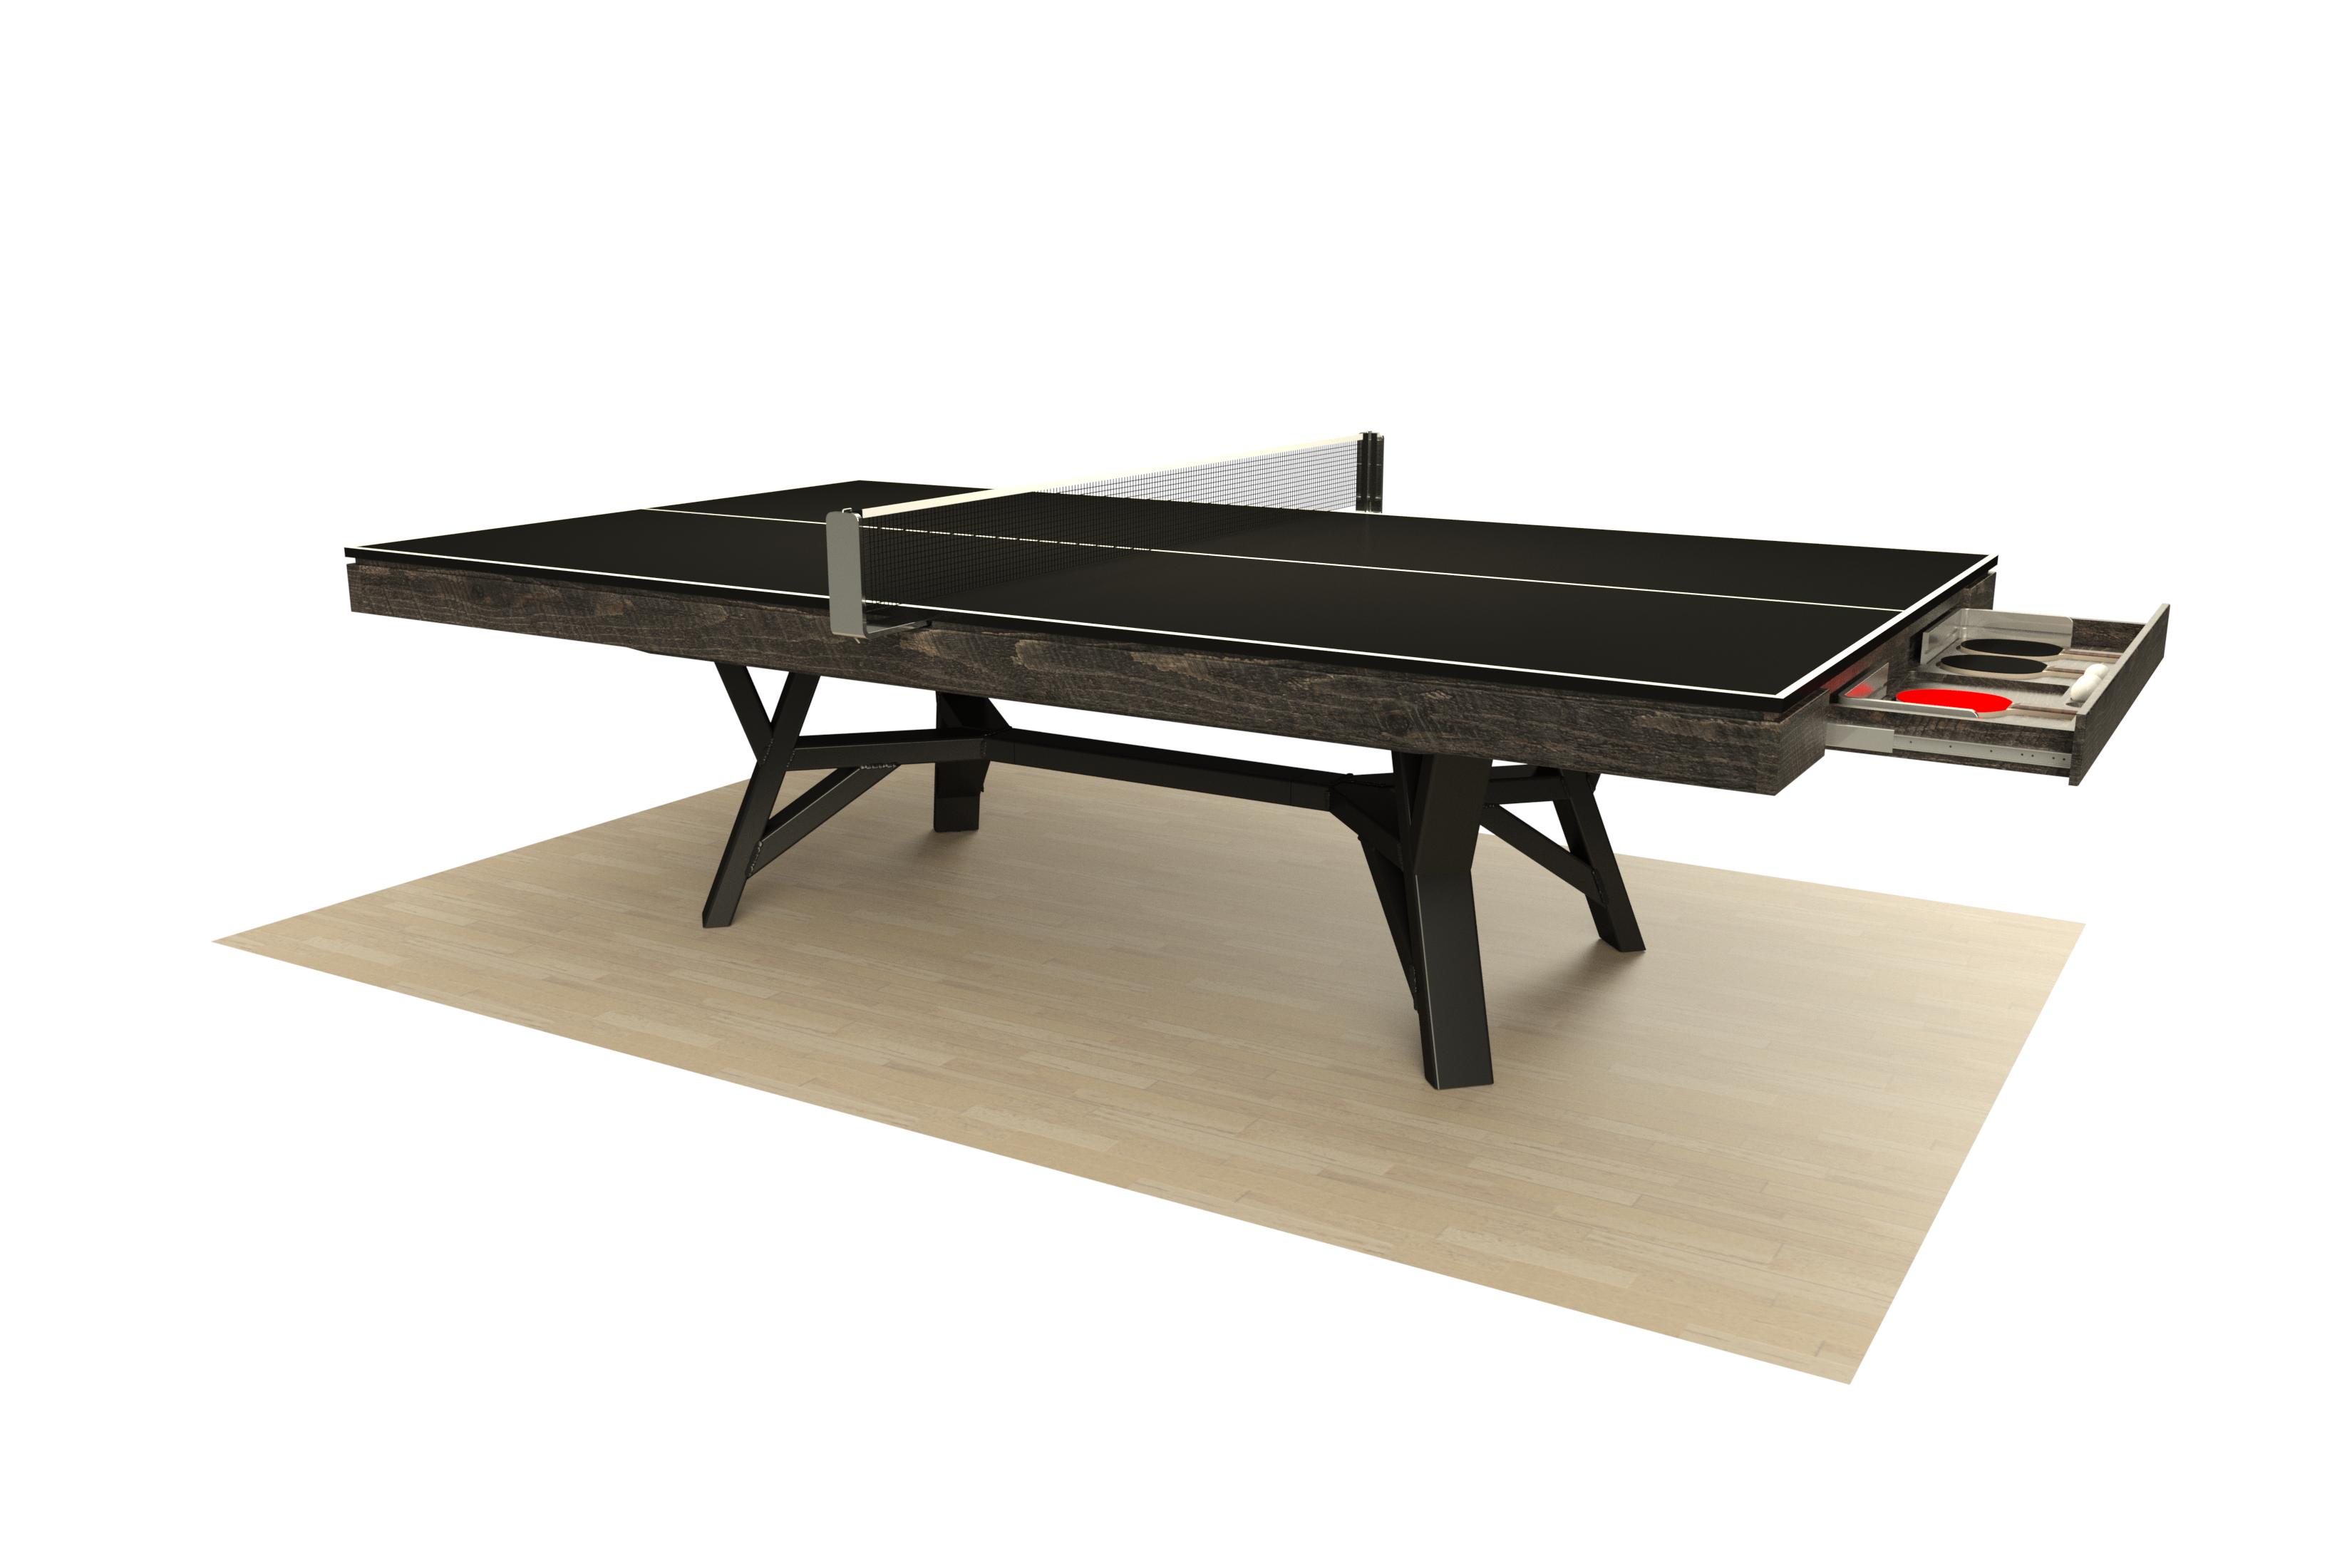 LA FORGE PING PONG TABLE